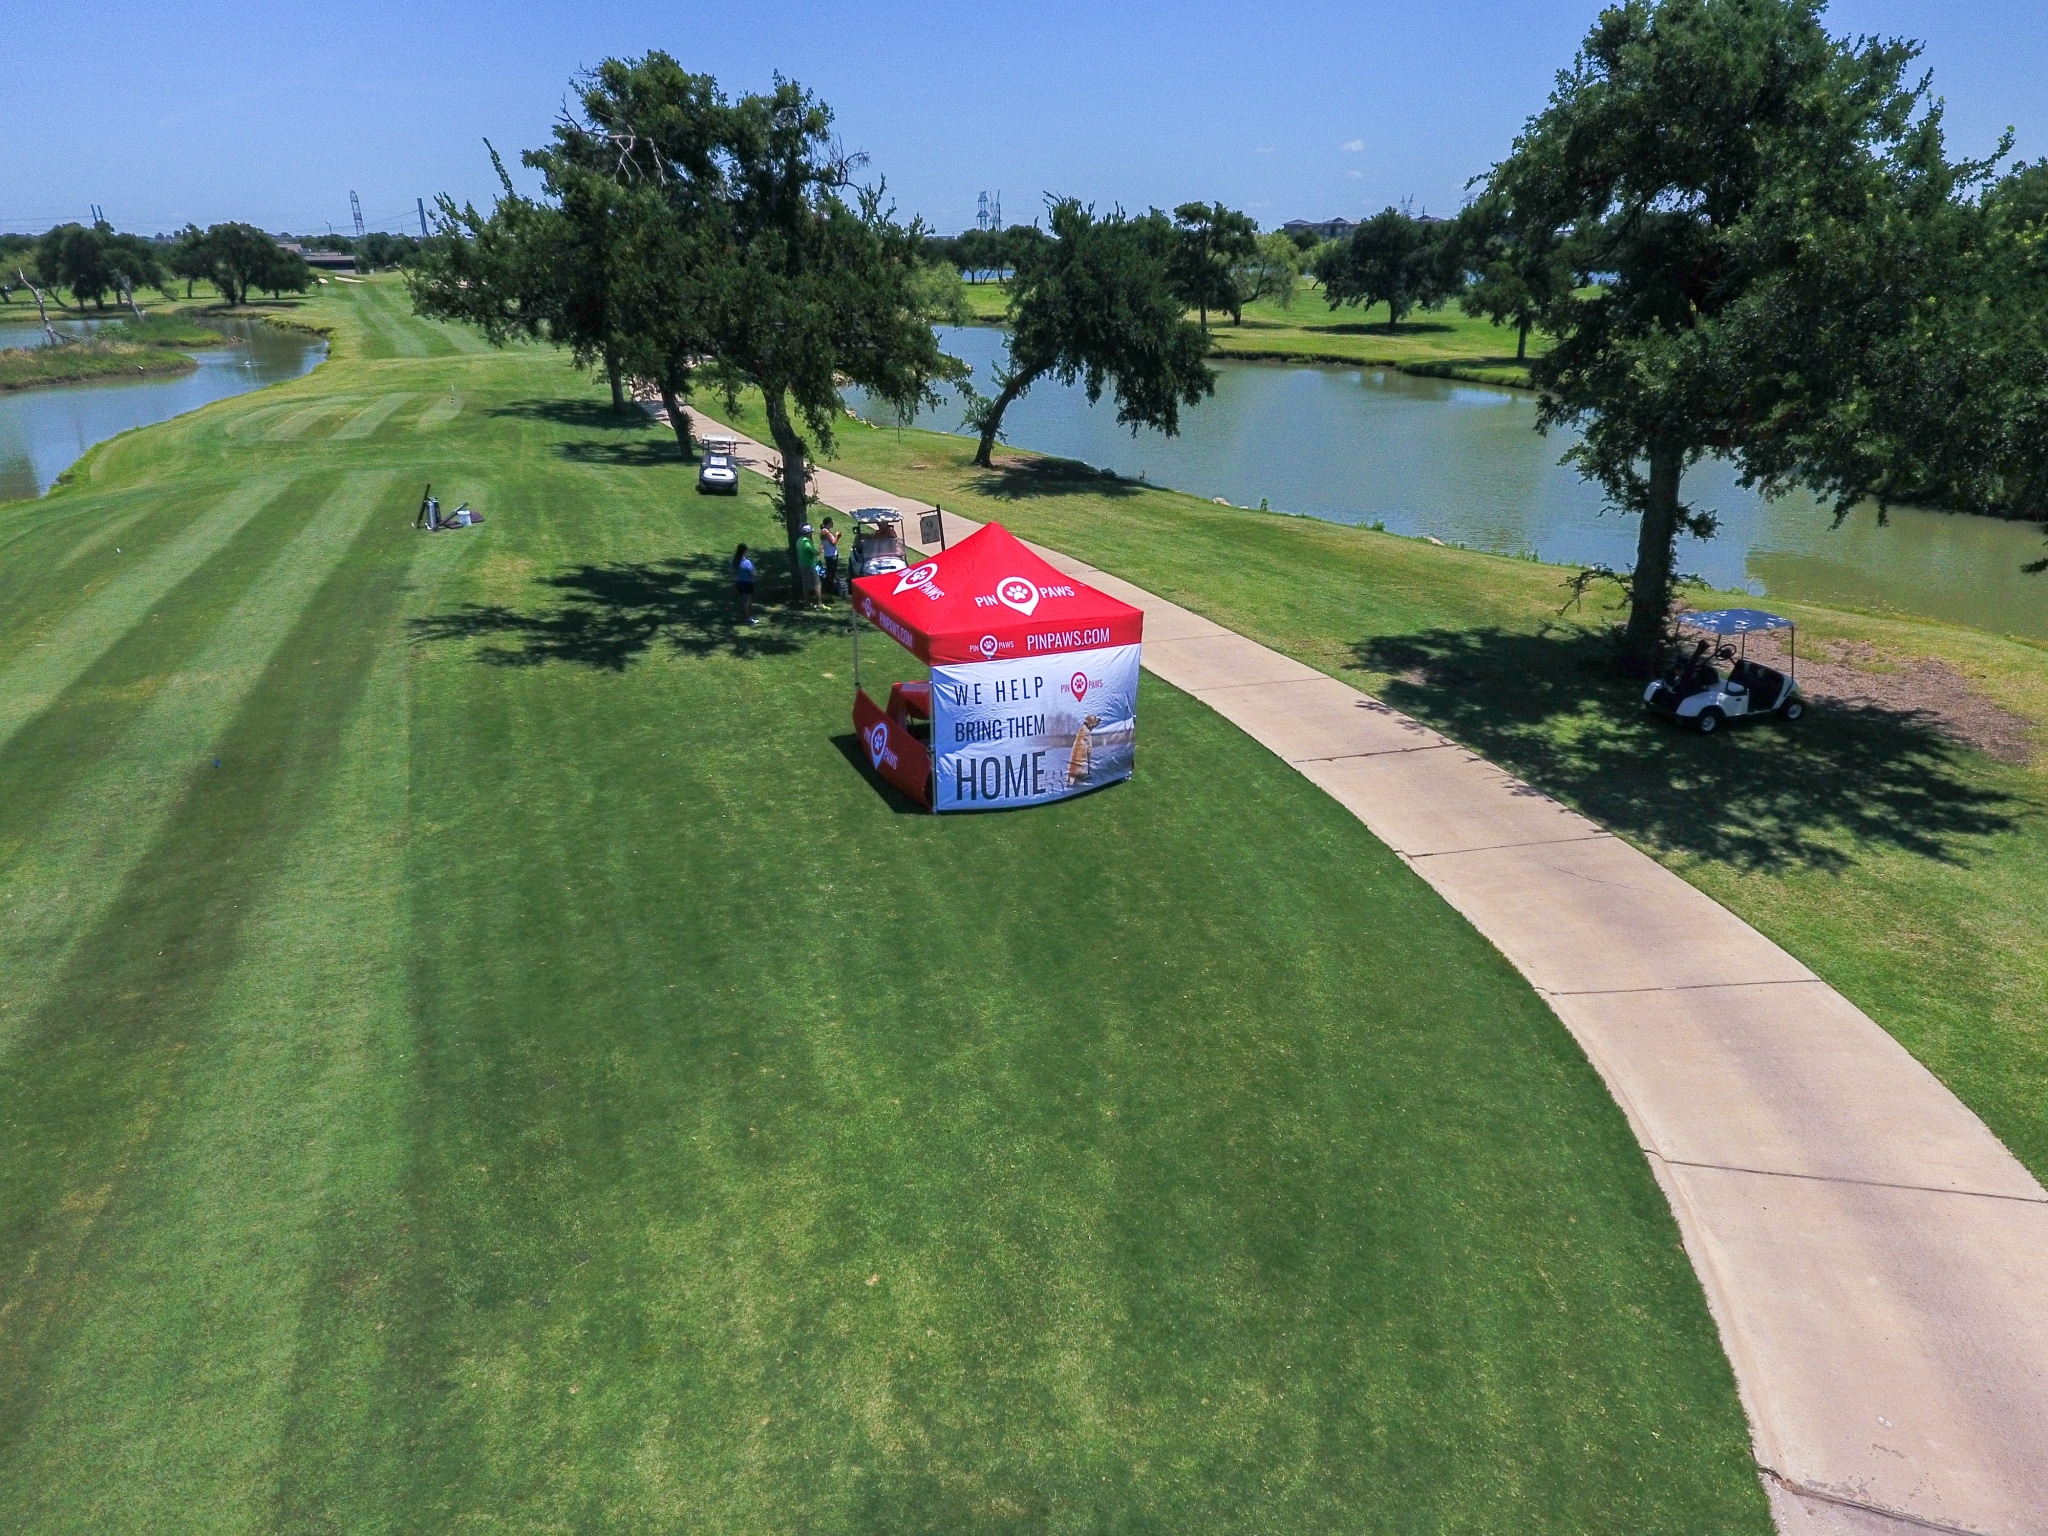 Drone photo over HRC tournament with Pin Paws booth hosting shot gun golf hole